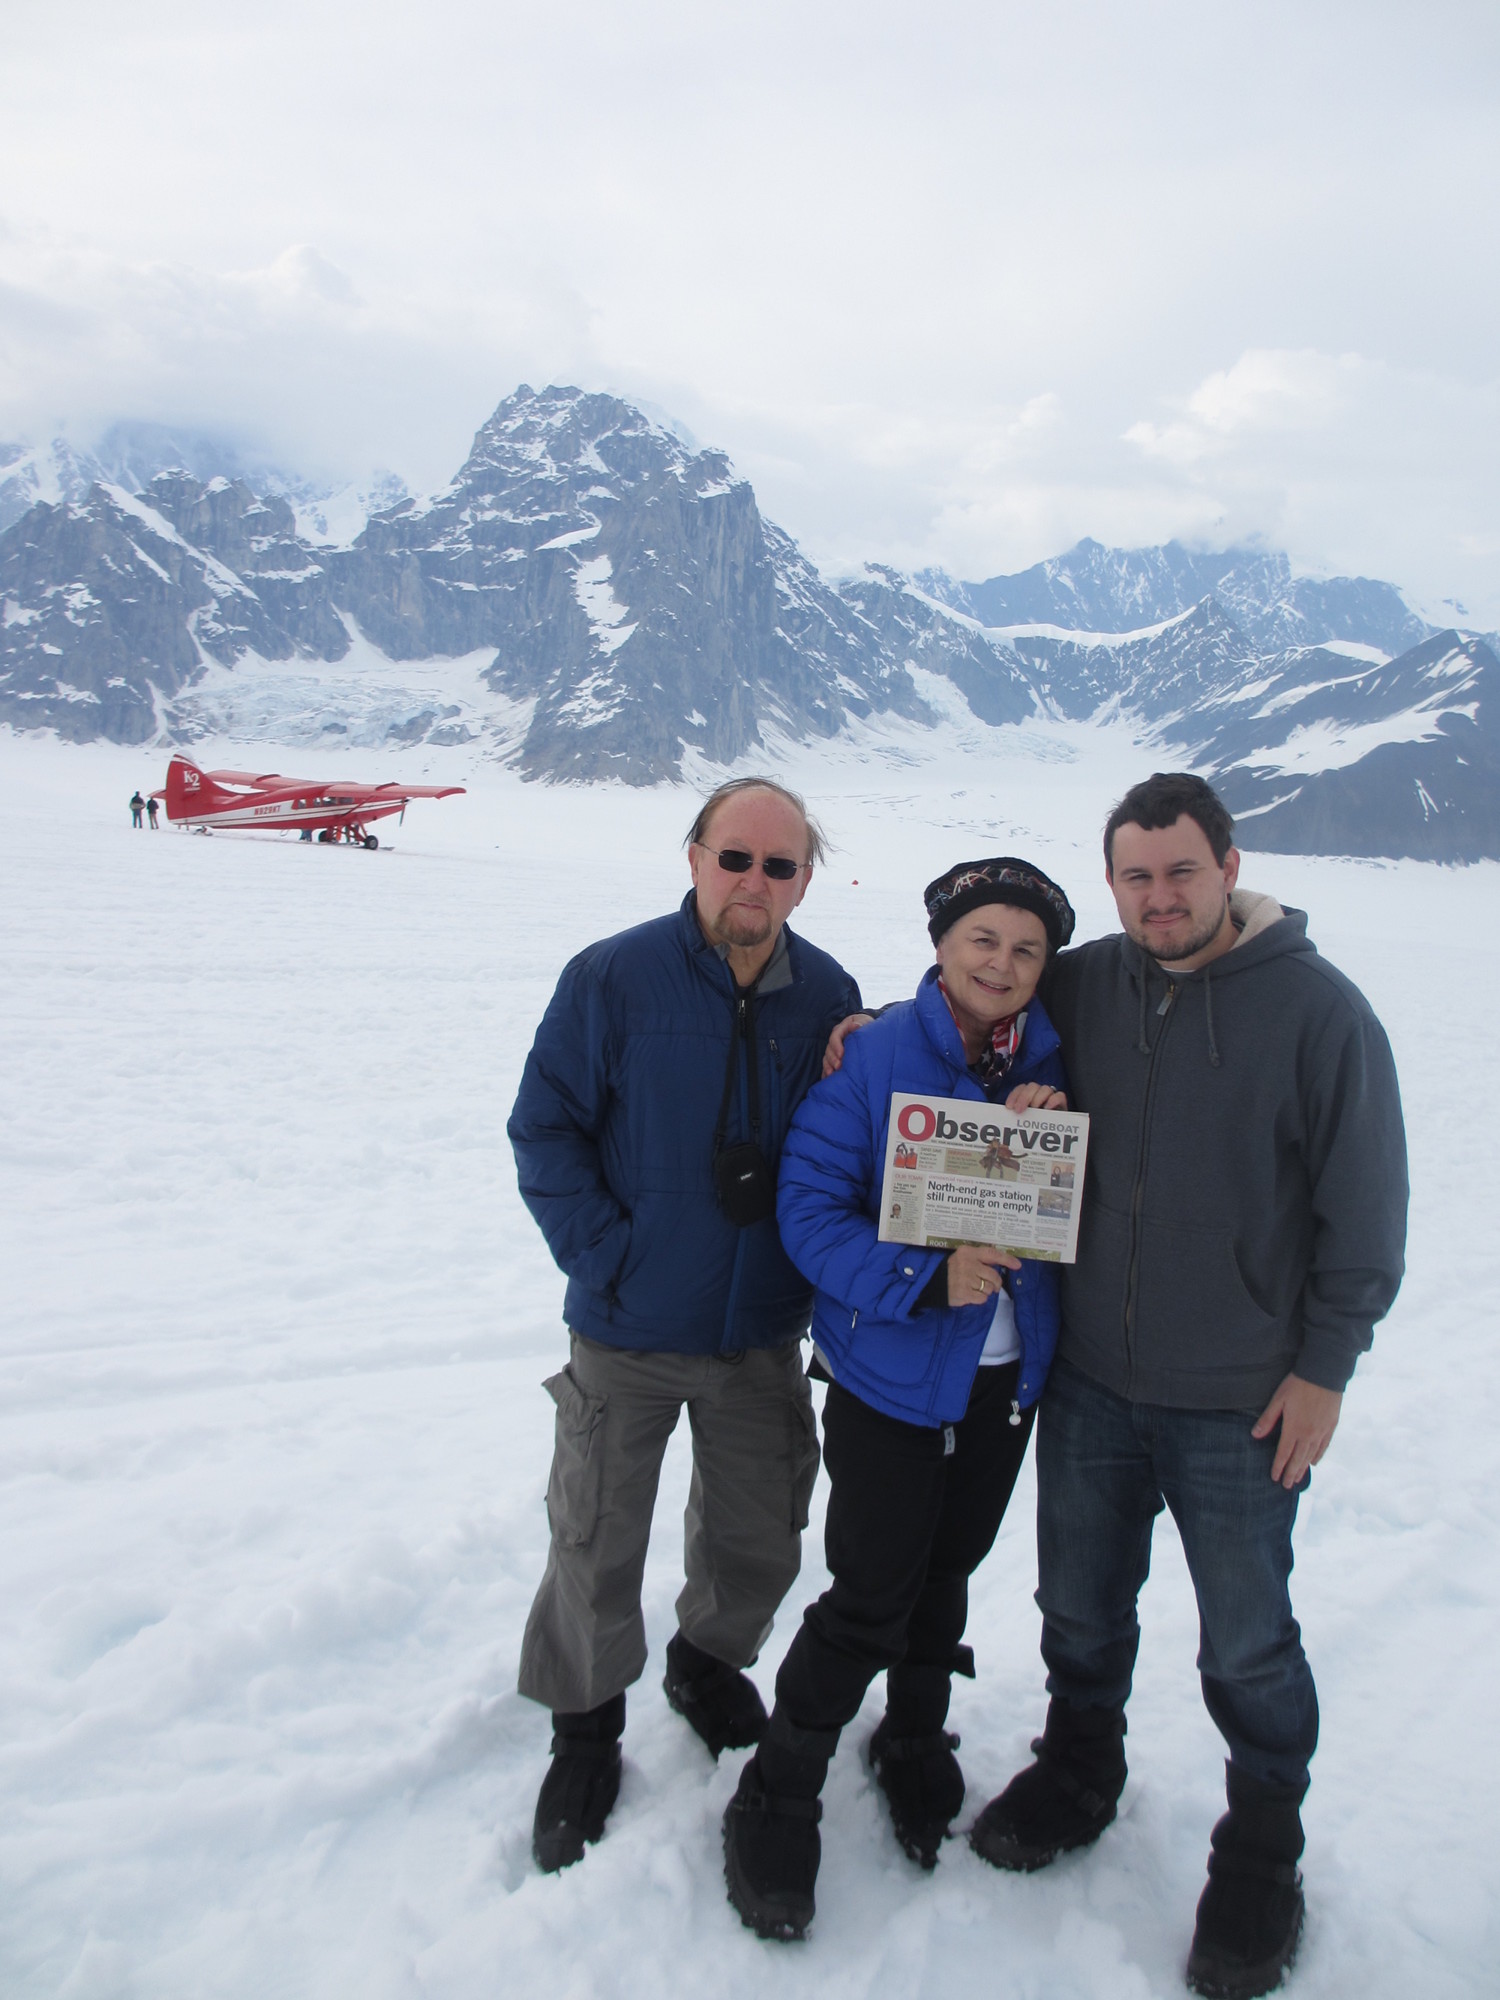 George, Anisa and Maksym Mycak, of Longboat Key, display their Longboat Observer on a flightseeing landing in the Don Sheldon Amphitheater of Alaska’s Ruth Glacier, which flows off Denali, the highest peak in North America.